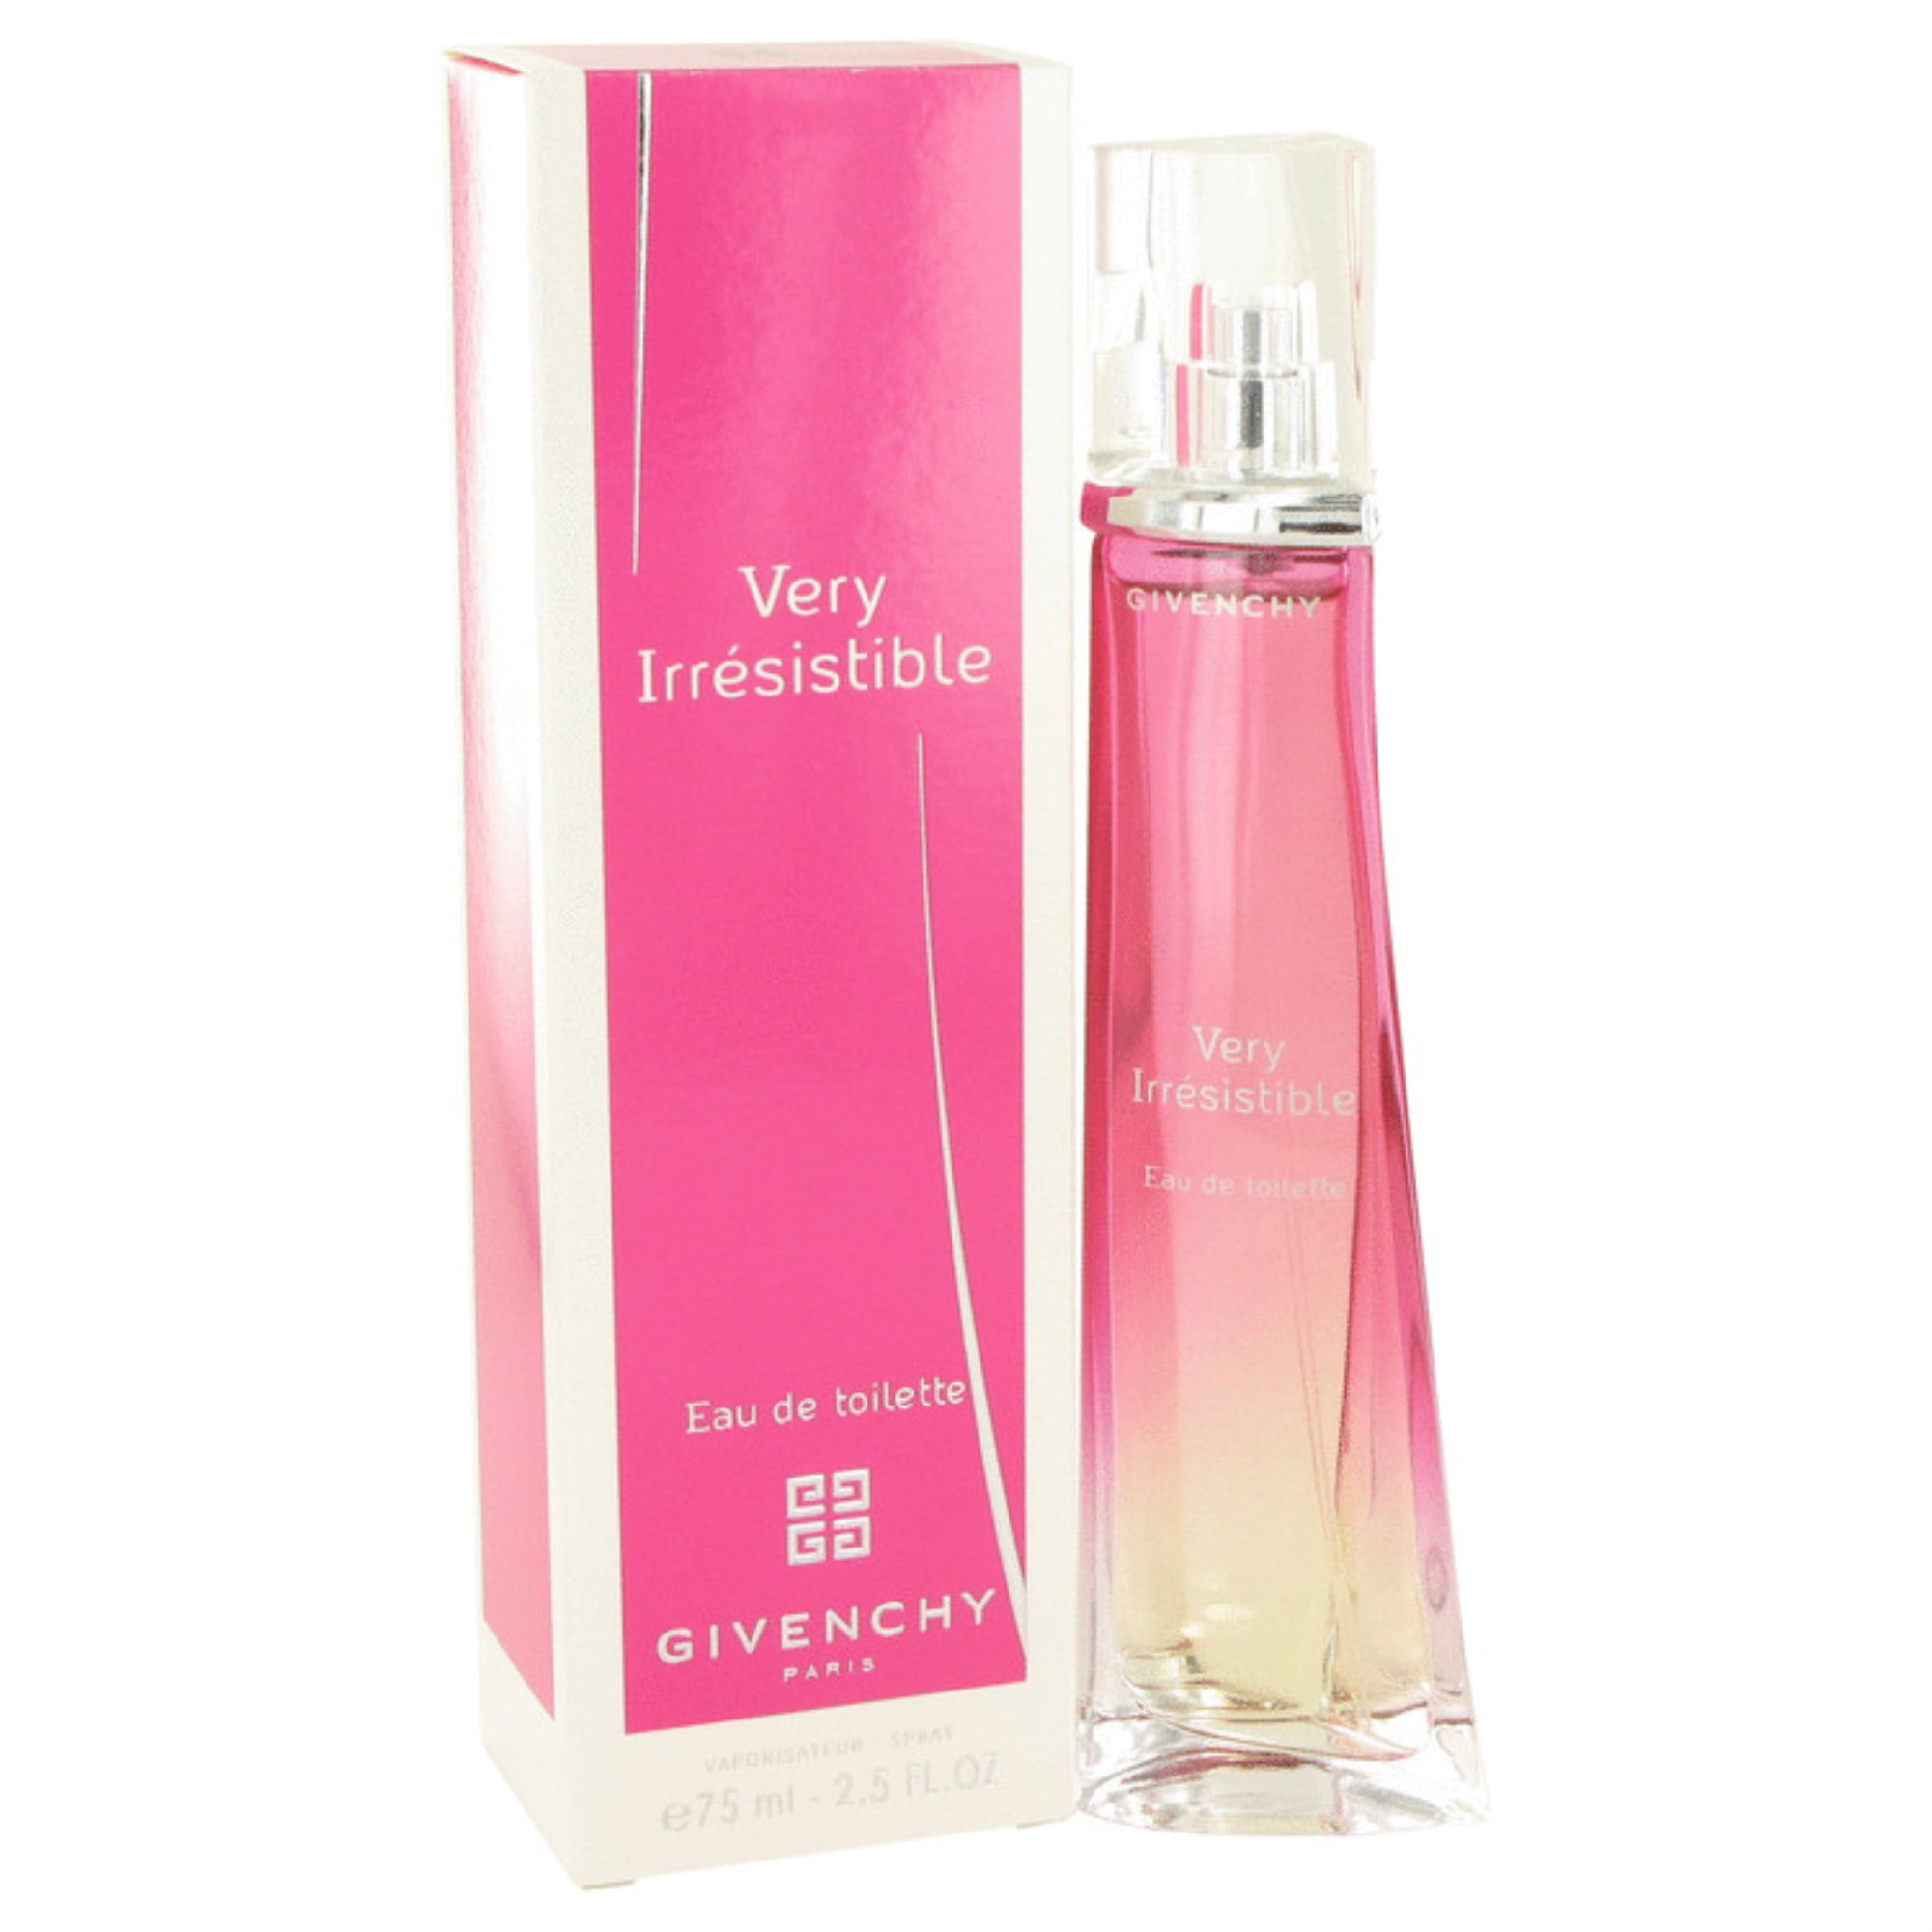 Very Irresistible by Givenchy,Eau De Toilette Spray 2.5 oz, For Women ...